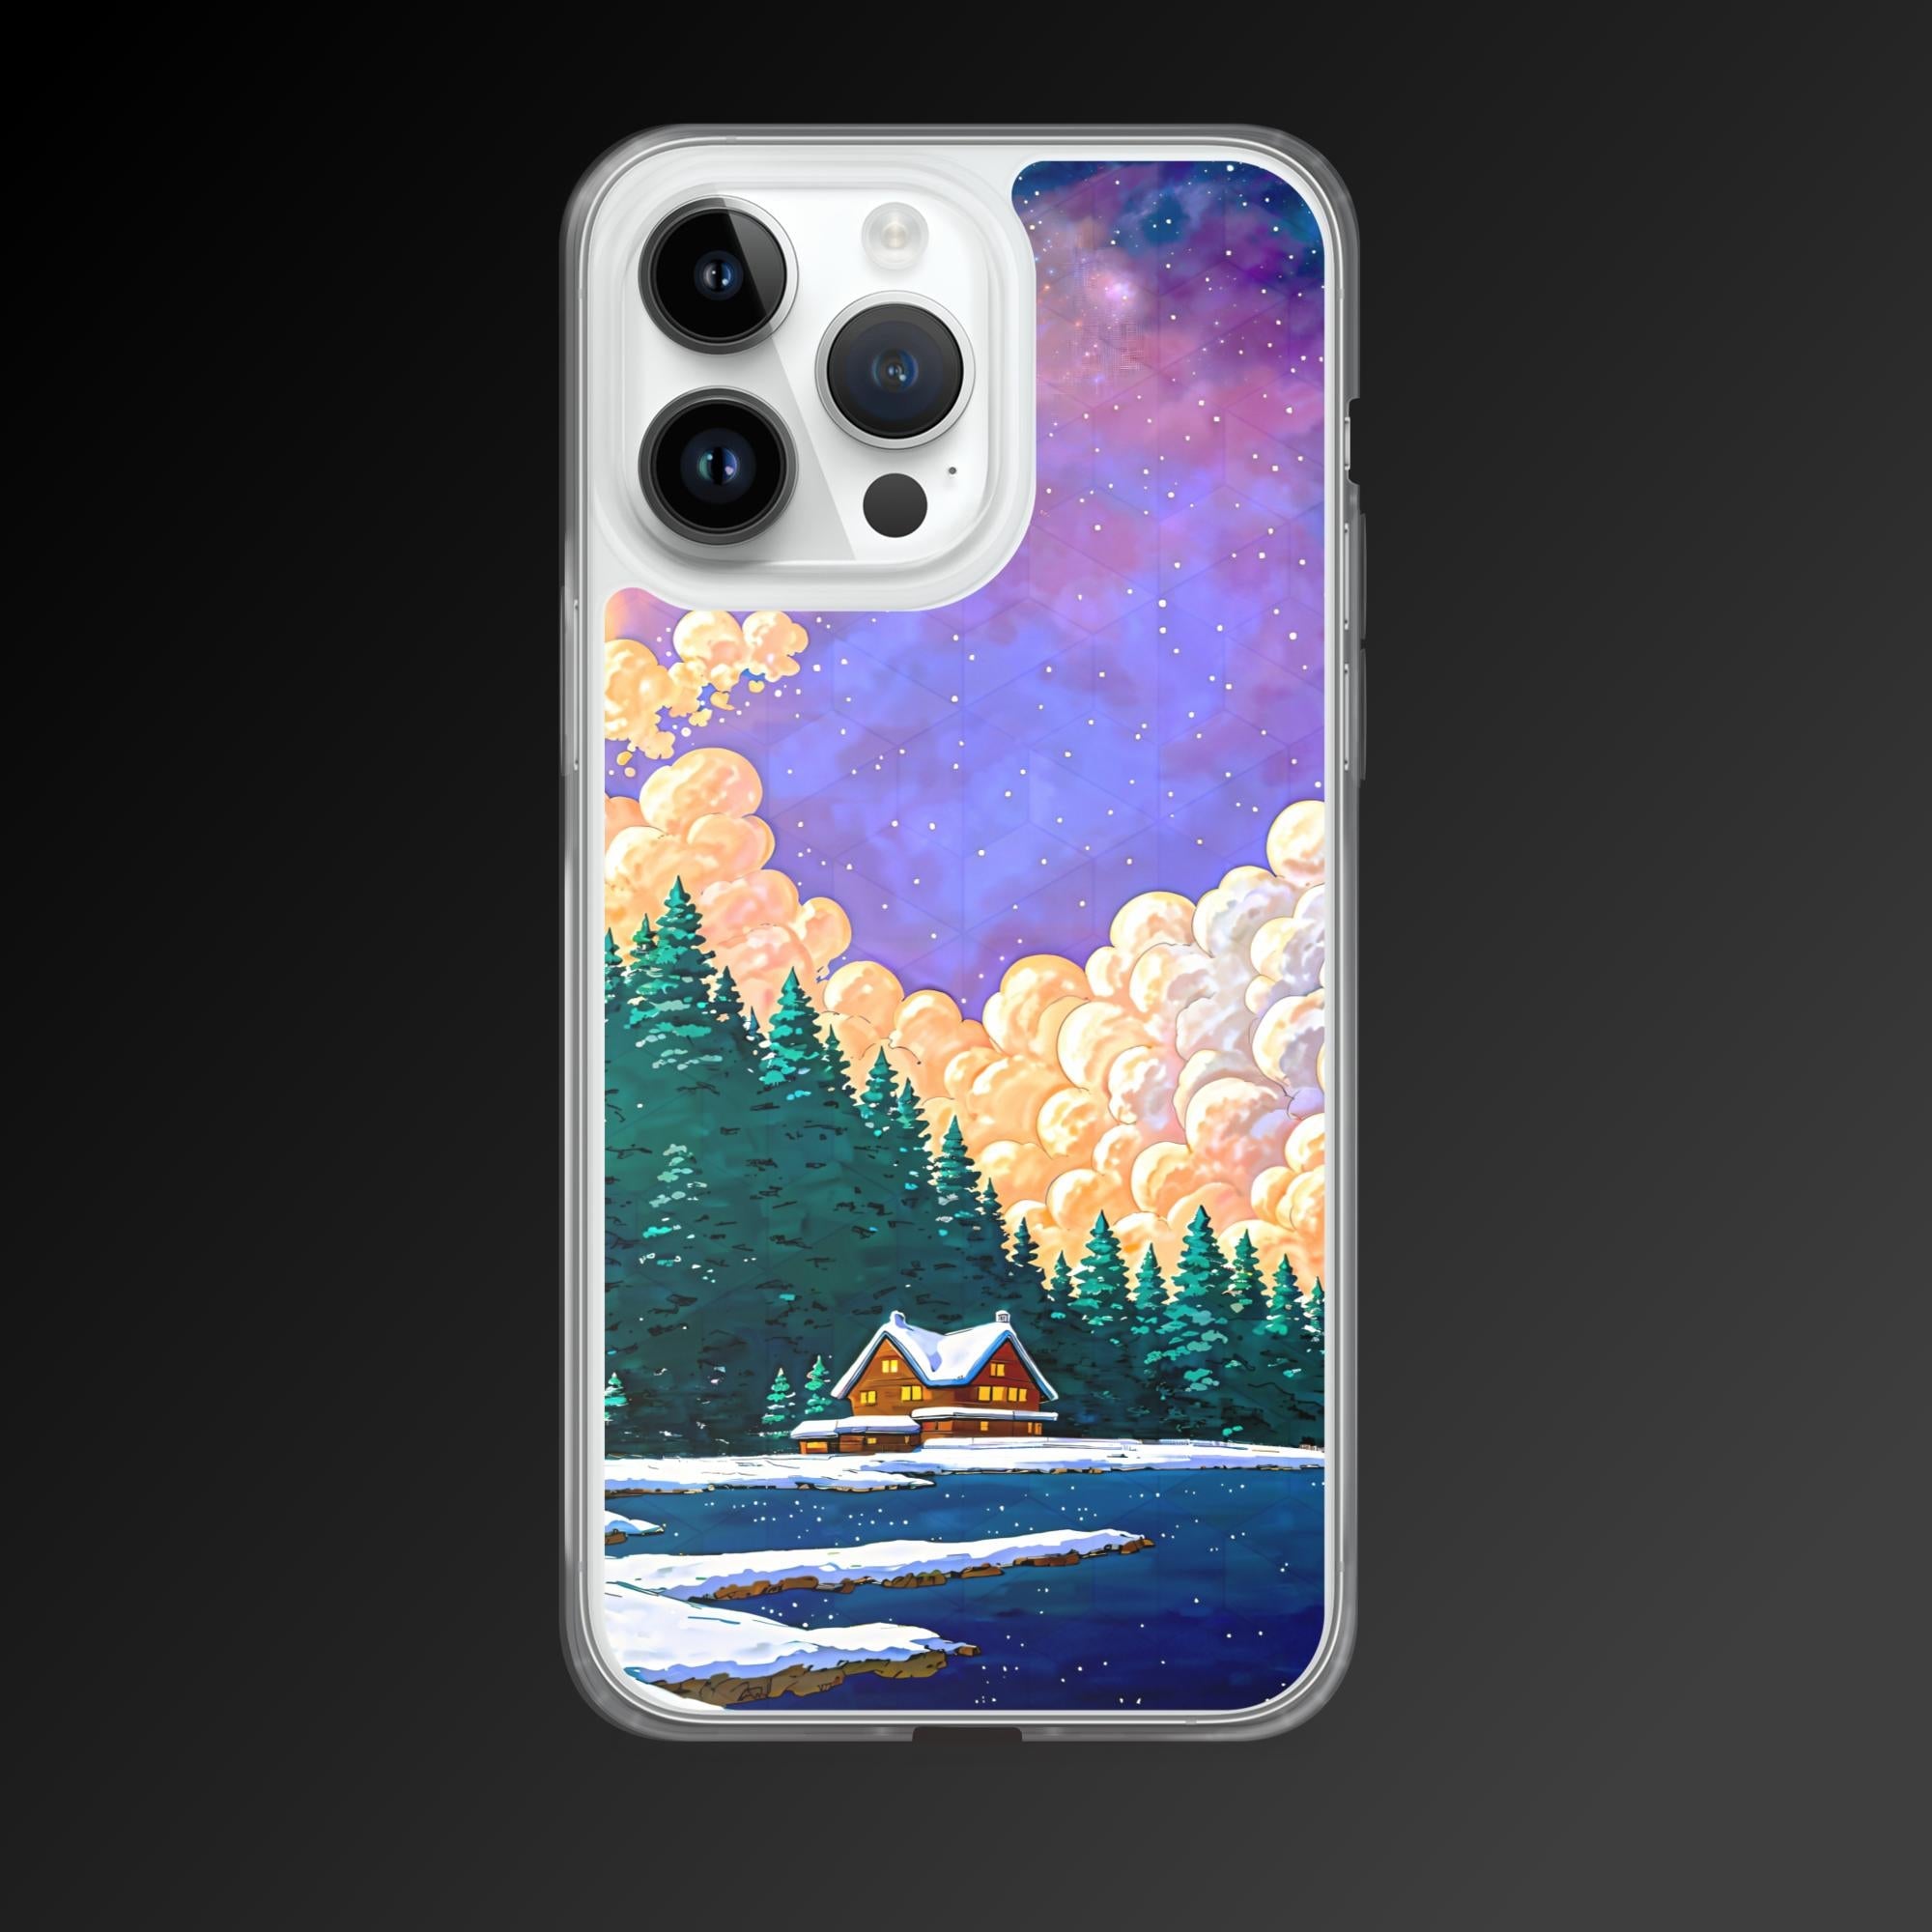 "Chilly cabin" clear iphone case - Clear iphone case - Ever colorful